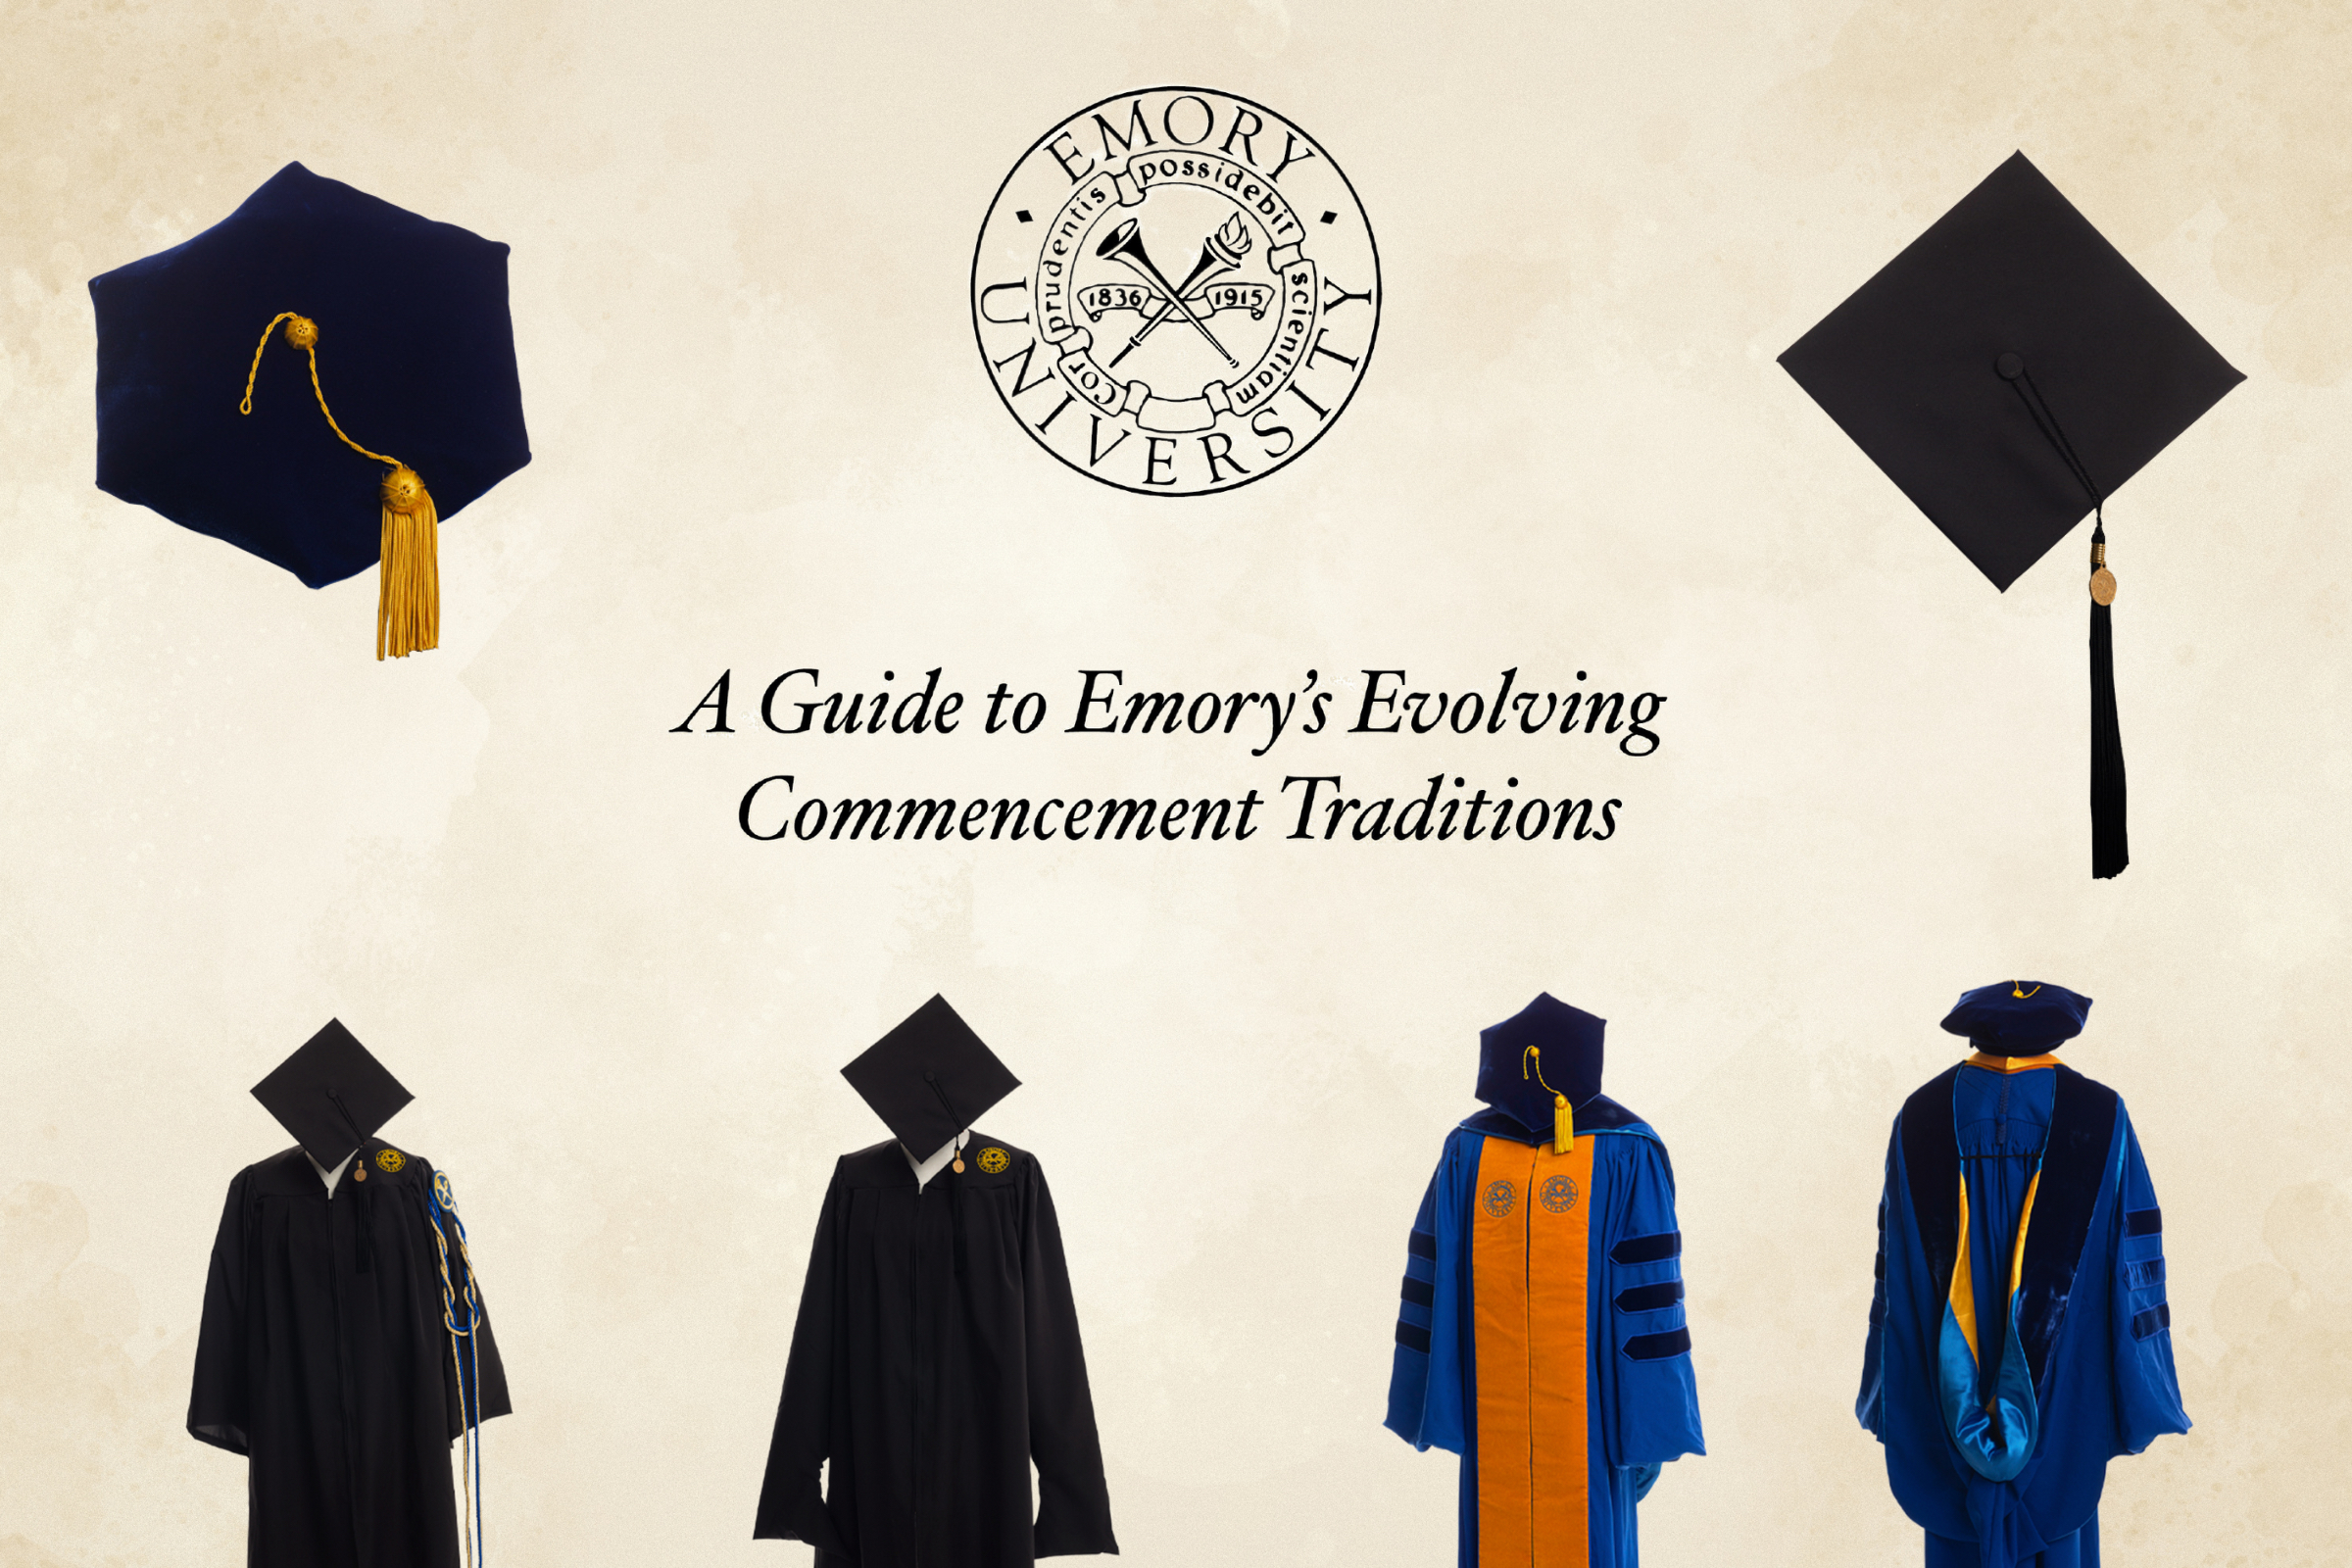 Undergraduate, graduate and doctoral graduation gowns and caps